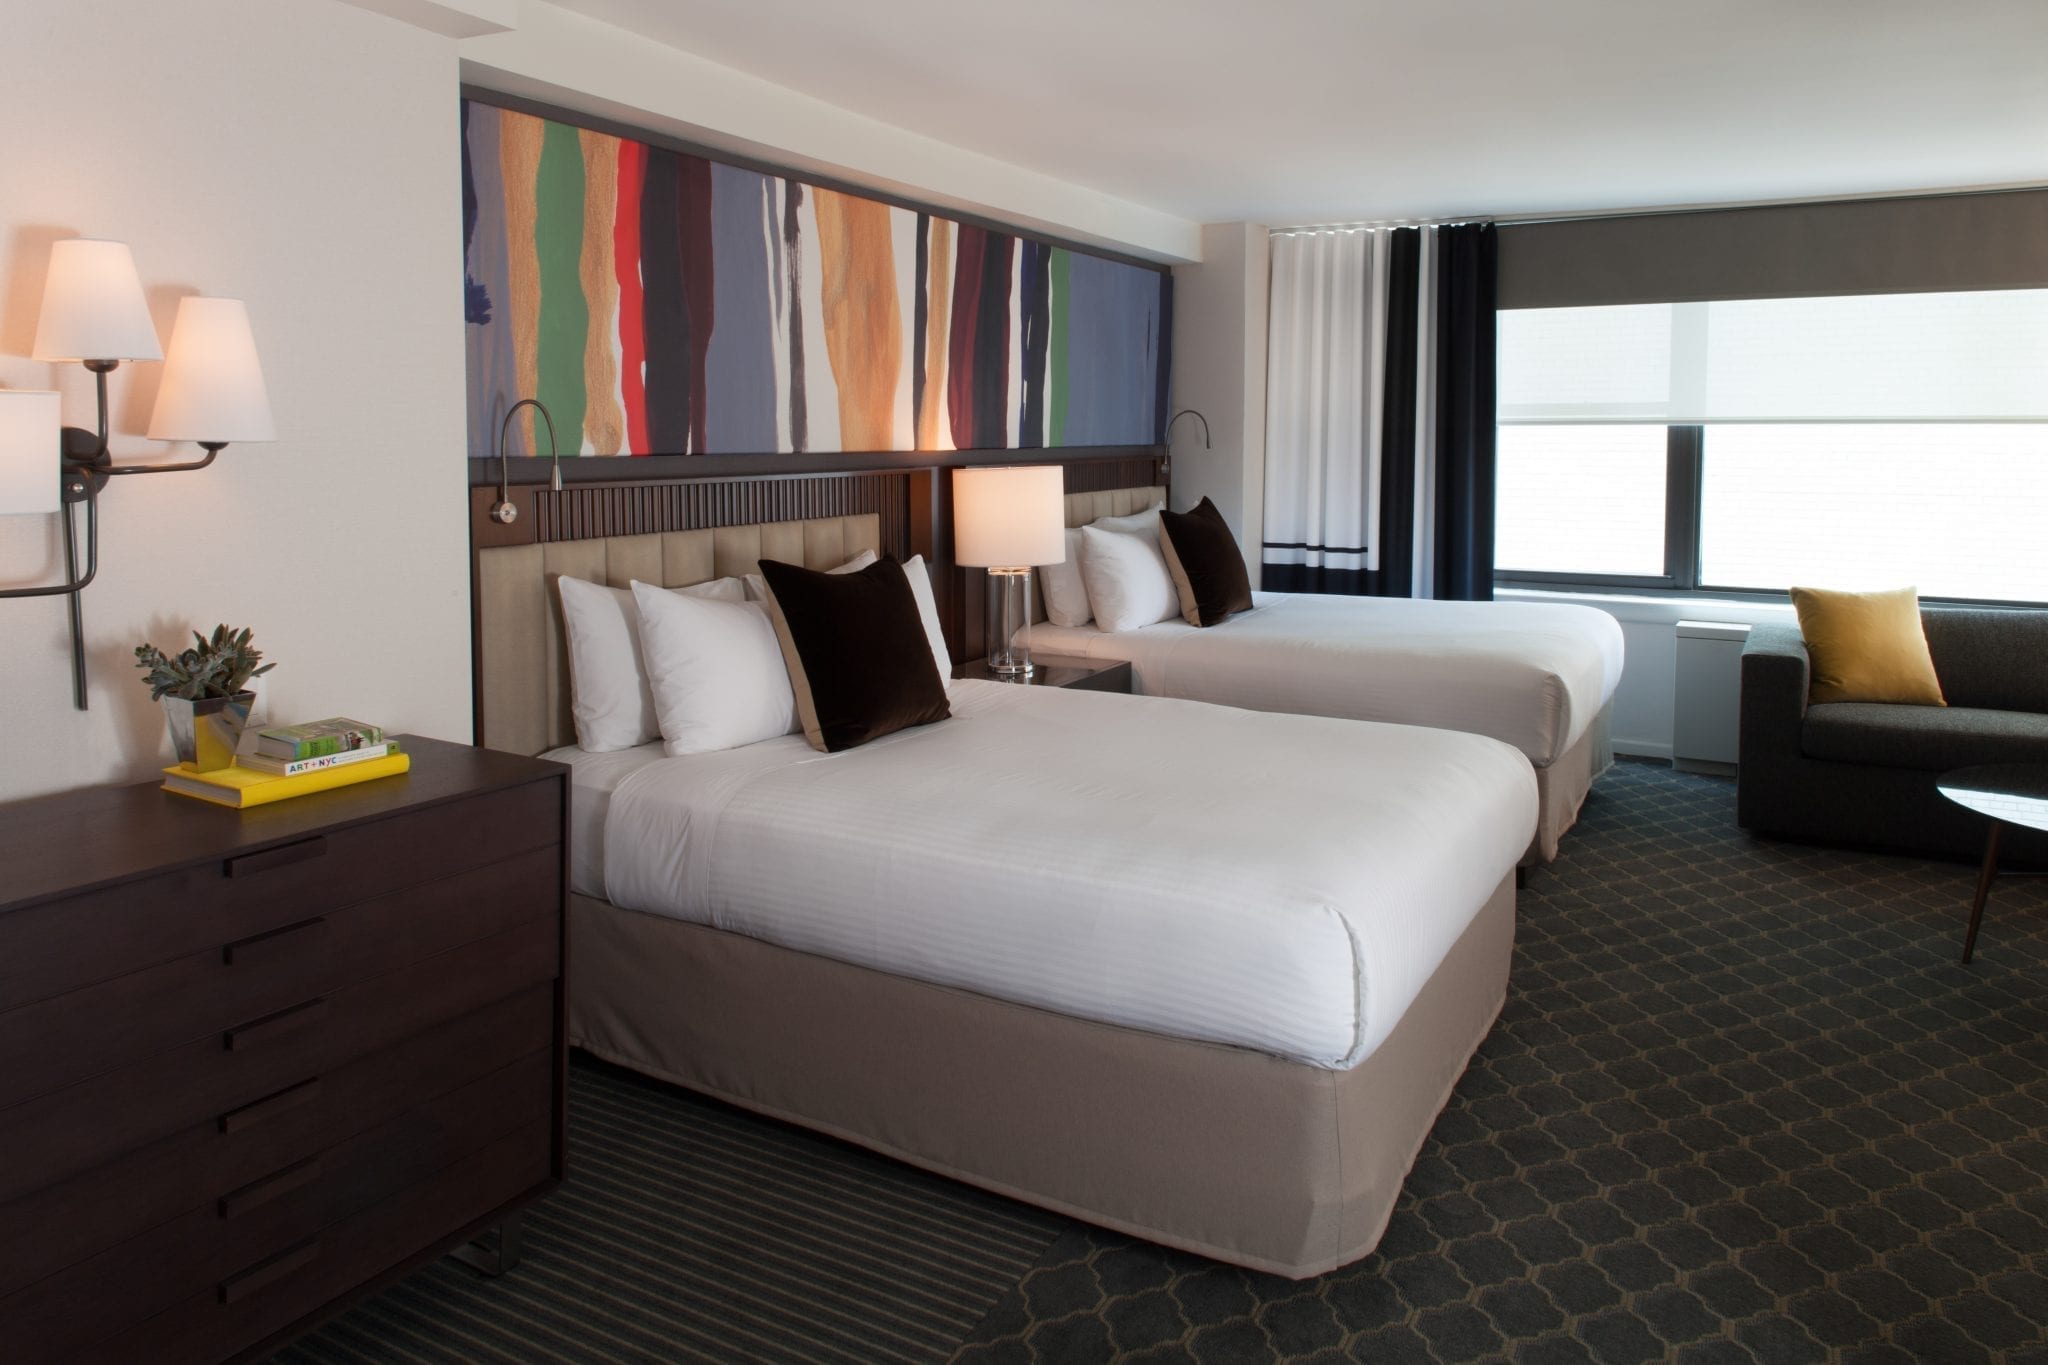 Perspective view of two queen beds inside the Junior Suite of Fifty Hotel. A wide canvas of artwork is hung above.